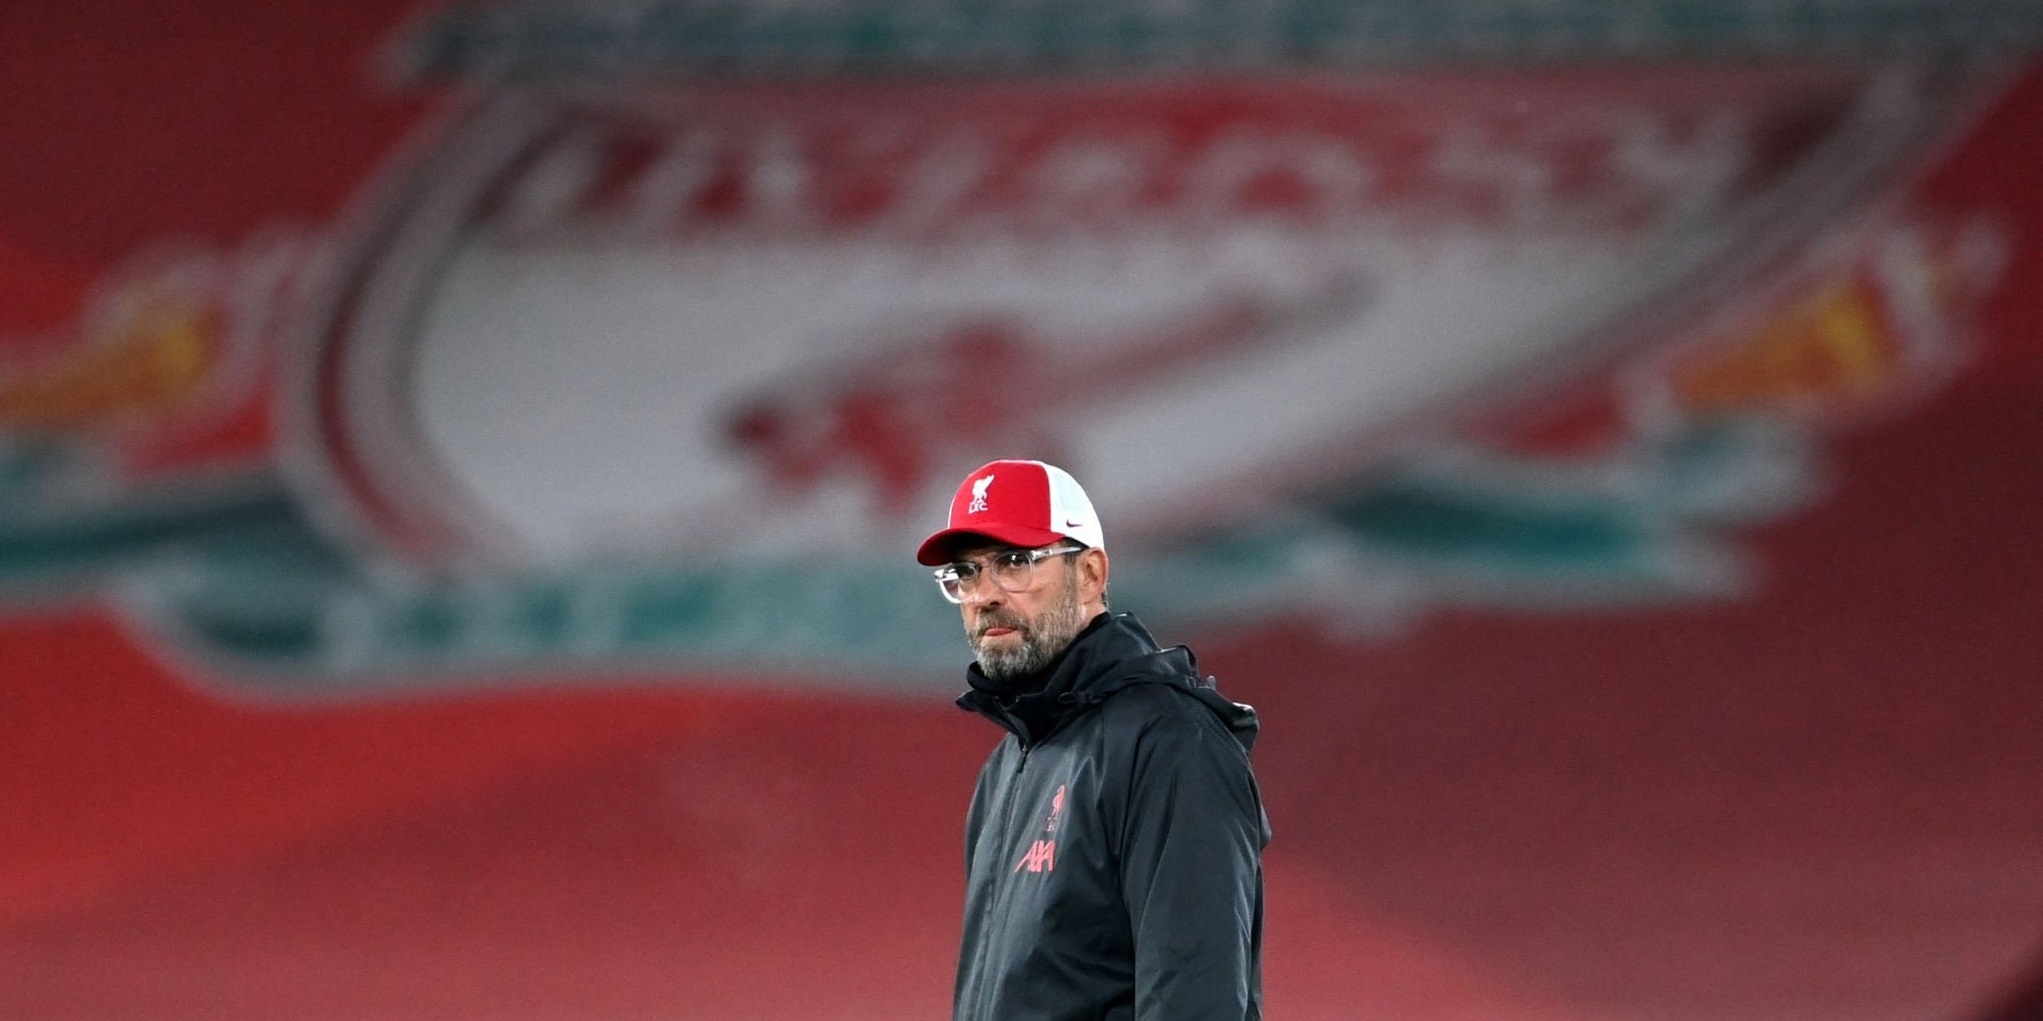 New report claims Klopp could walk after being thrown under the bus by FSG